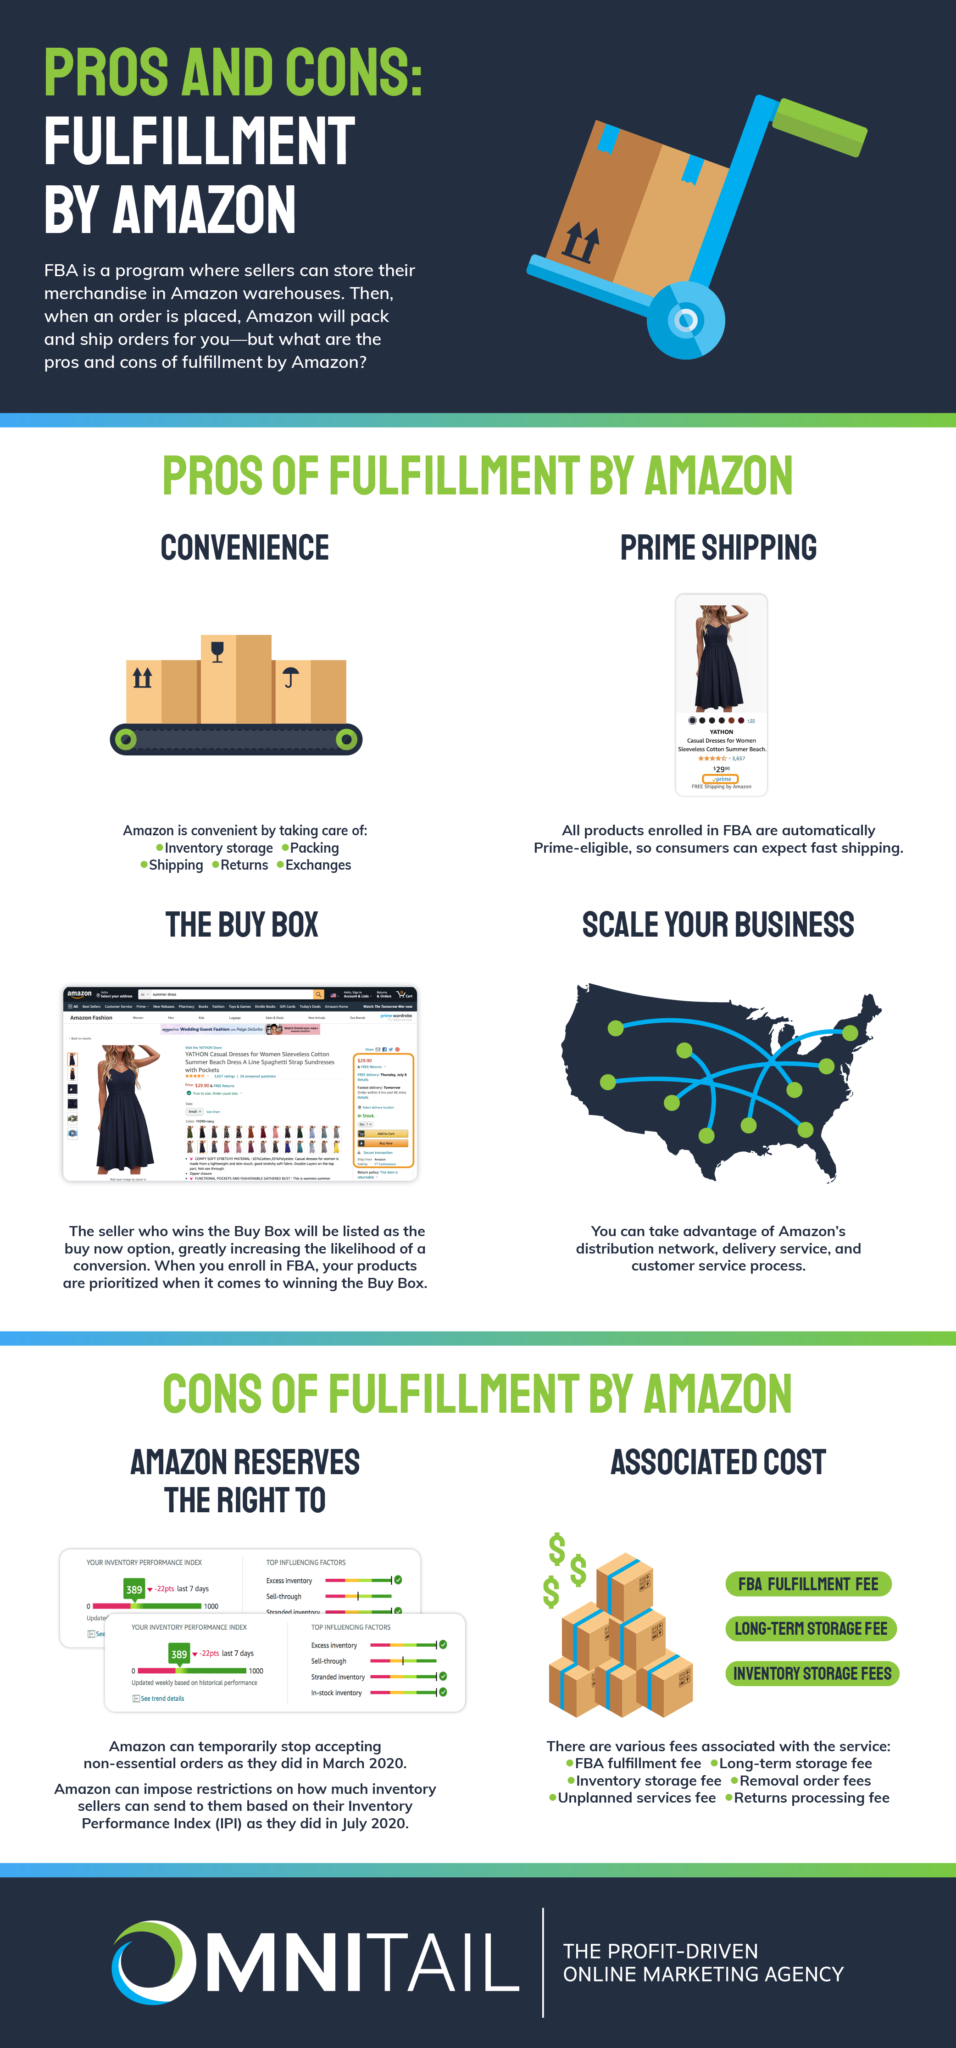 Fulfillment by Amazon (FBA): Pros and Cons [Infographic] | Omnitail